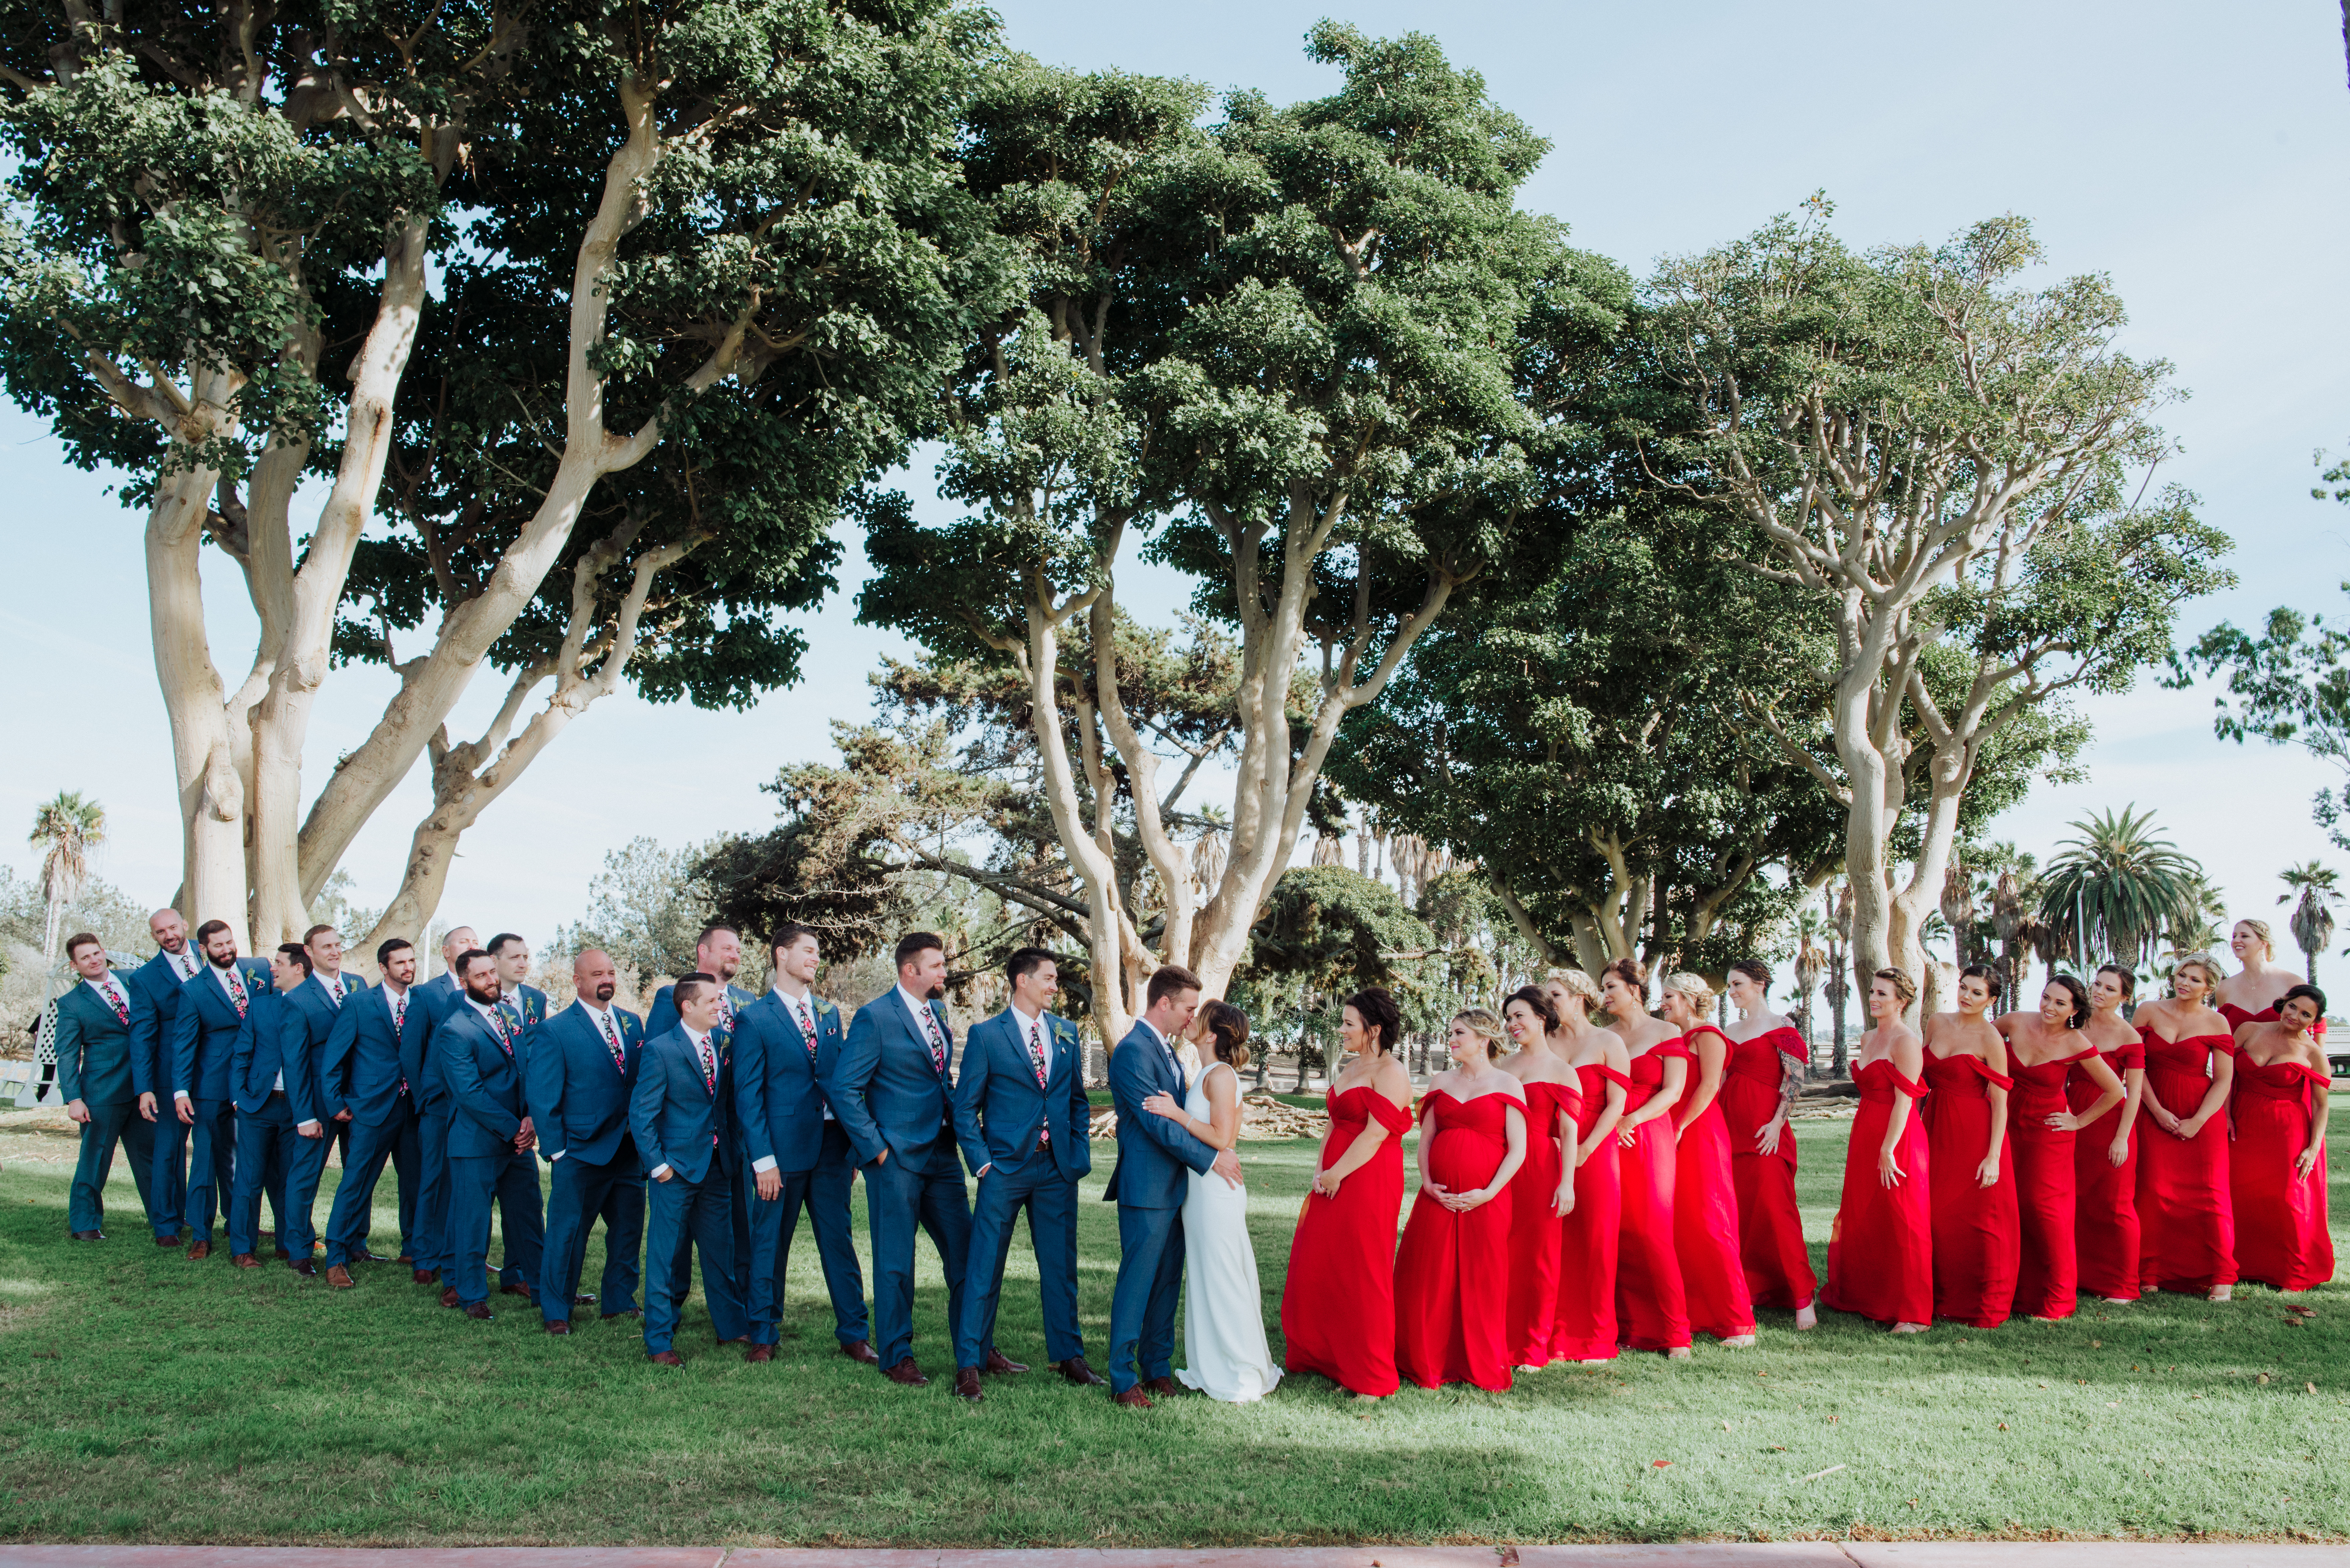 Bridal party portraitsat a Romantic Style San Diego Wedding at Marina Village by Kylie Rae Photography